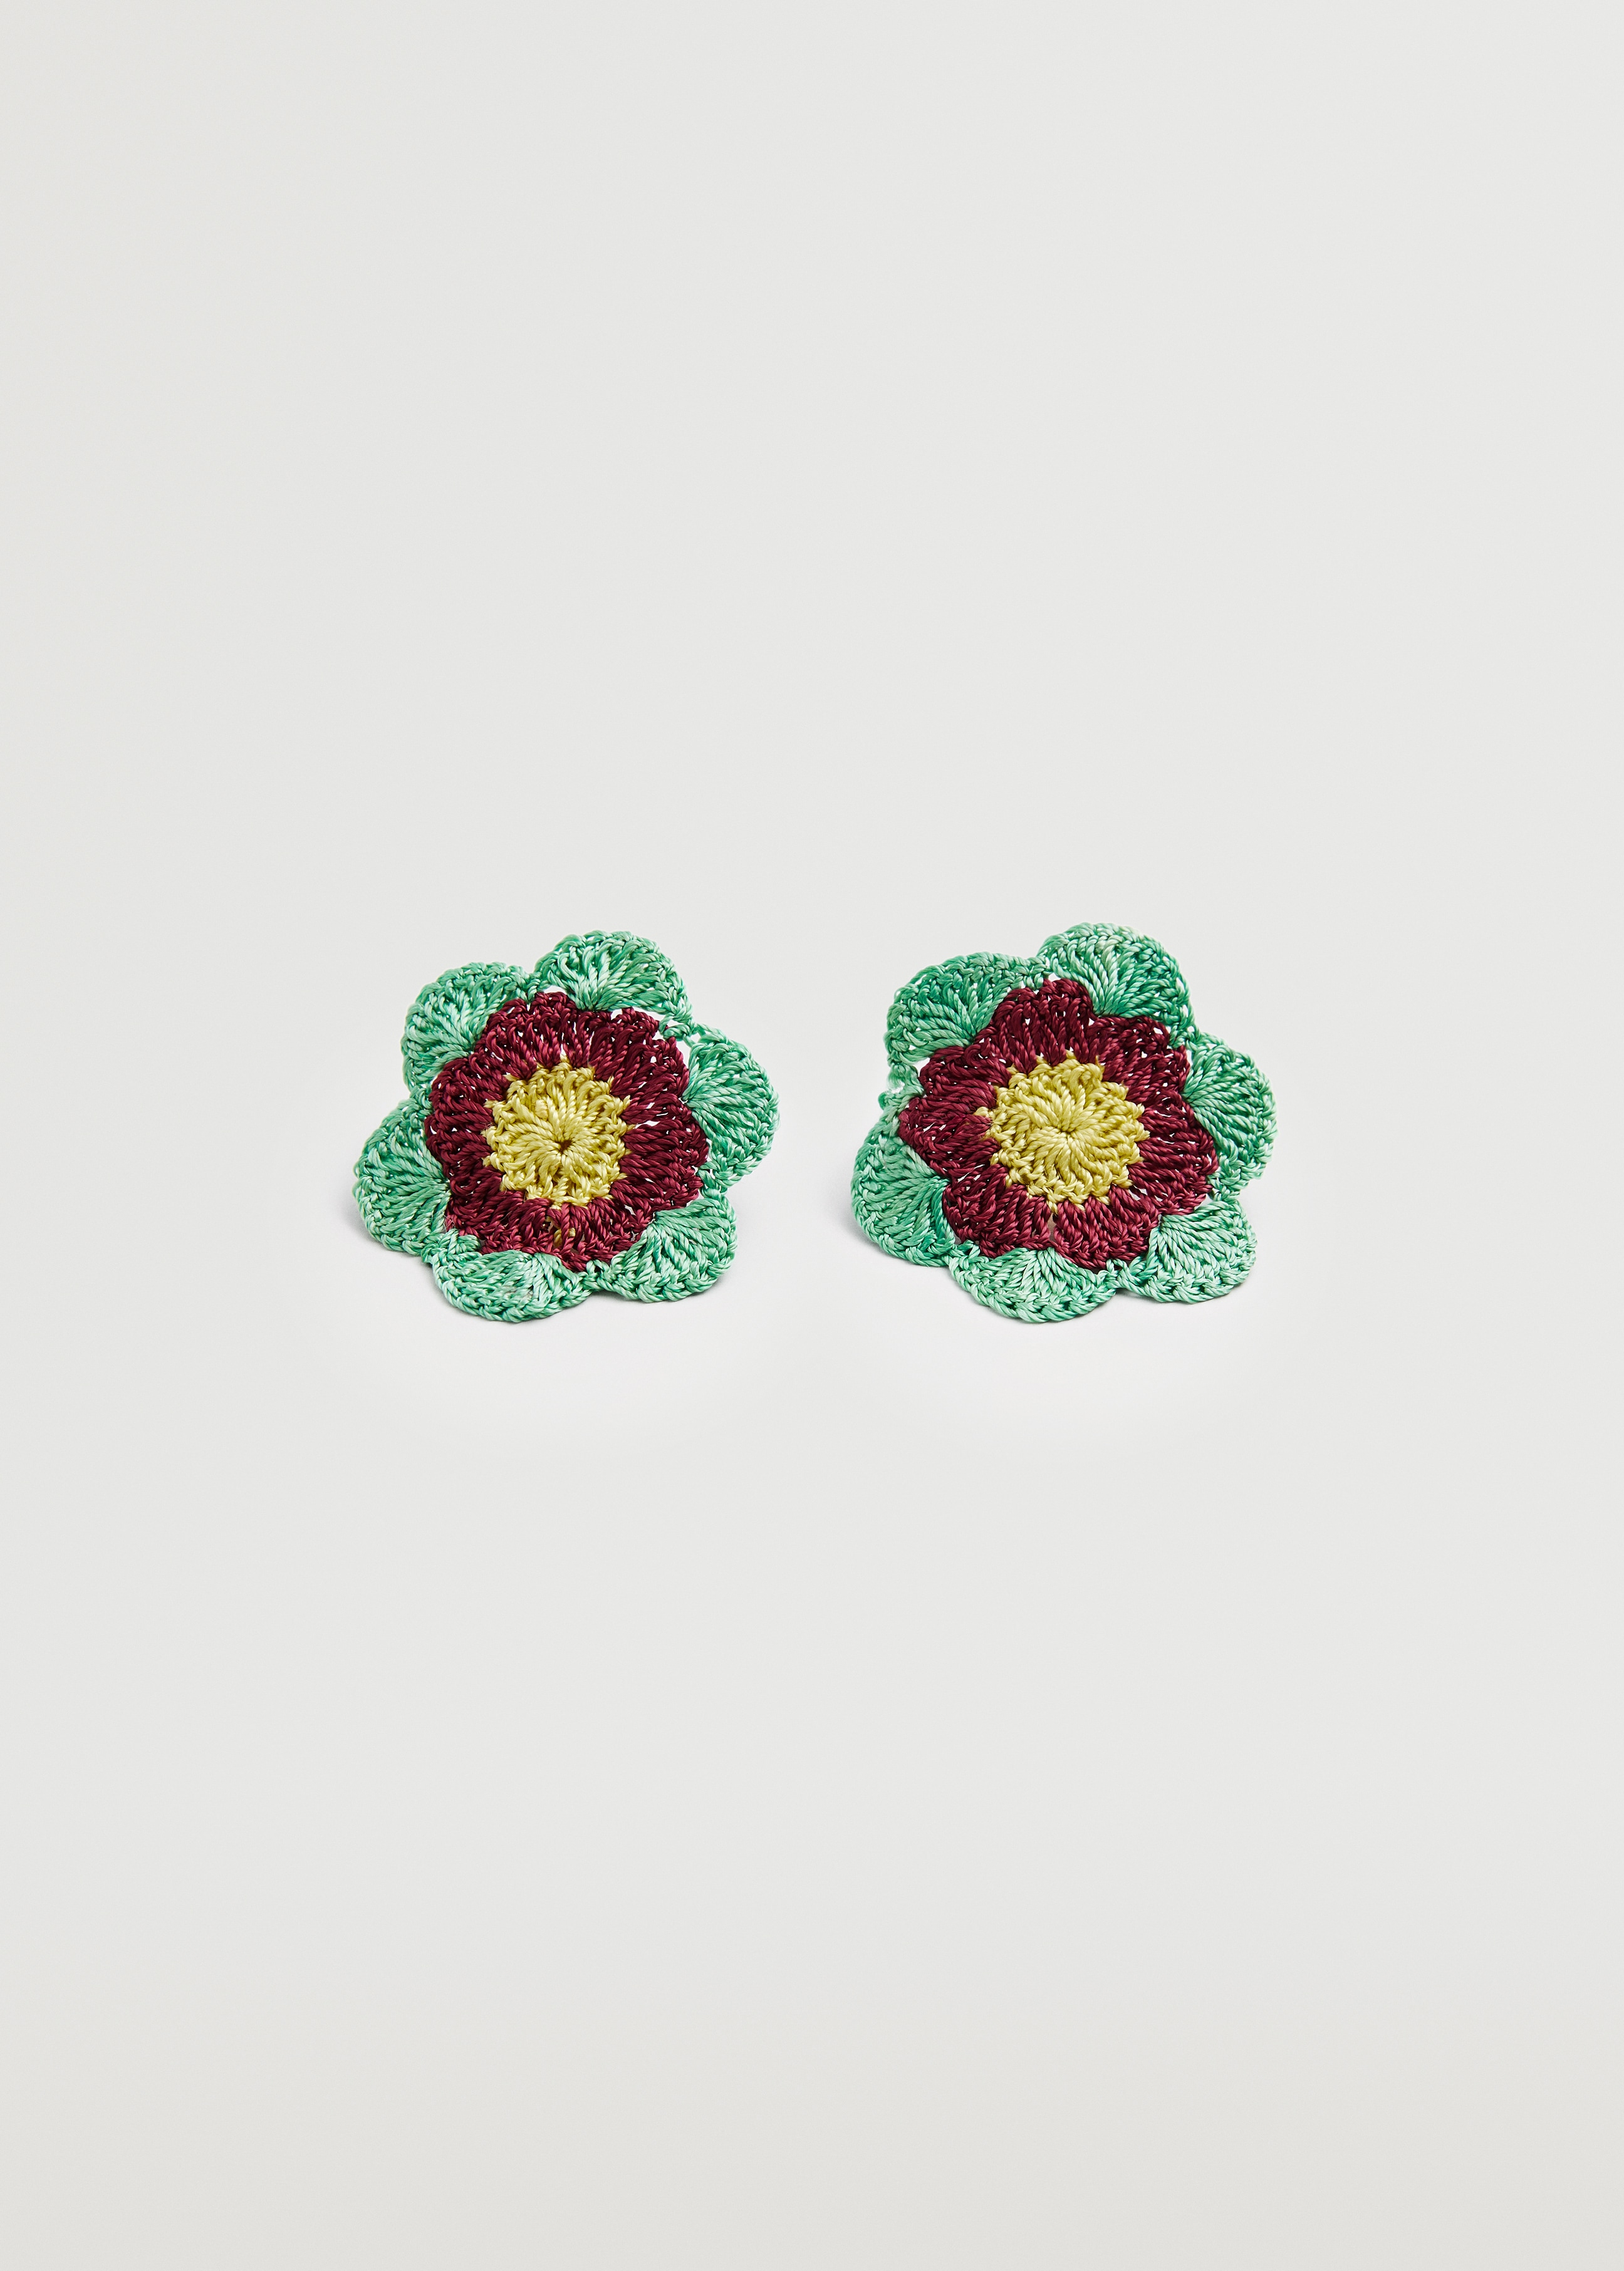 Floral earrings - Article without model